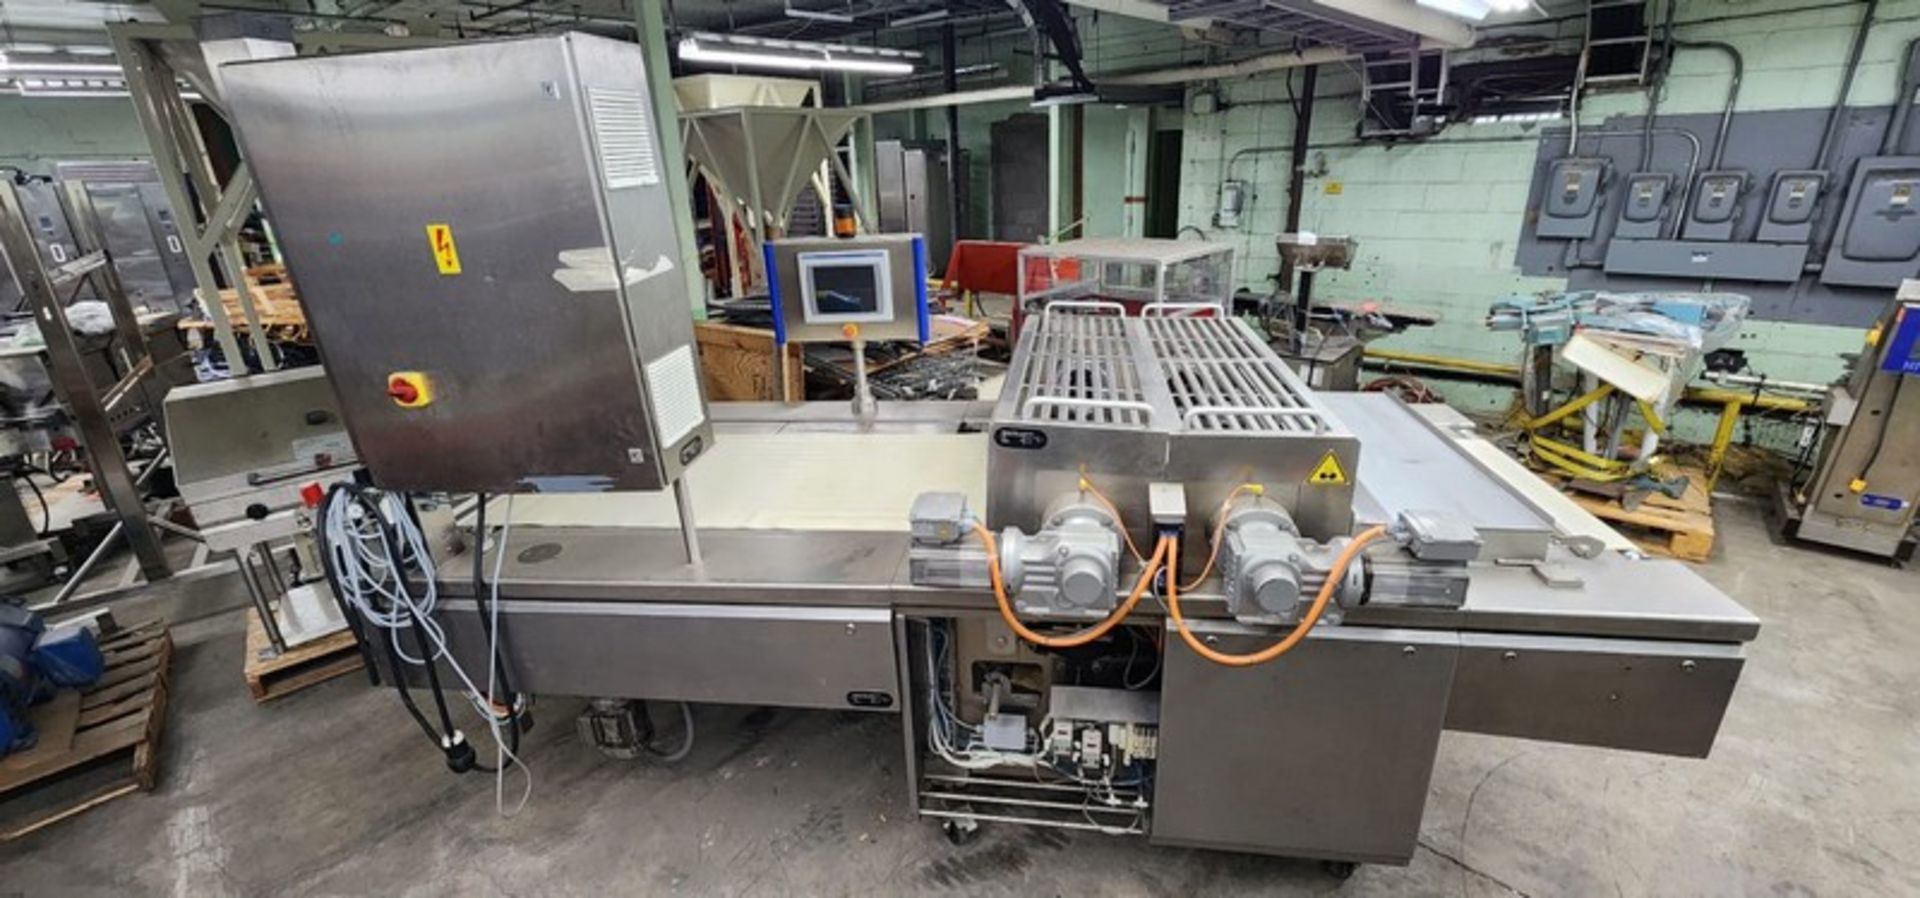 Rotary cookie Moulder Franz Haas Waffel and Keksanlagen System, Year 2011 Model DUC, Serial Number - Image 7 of 11